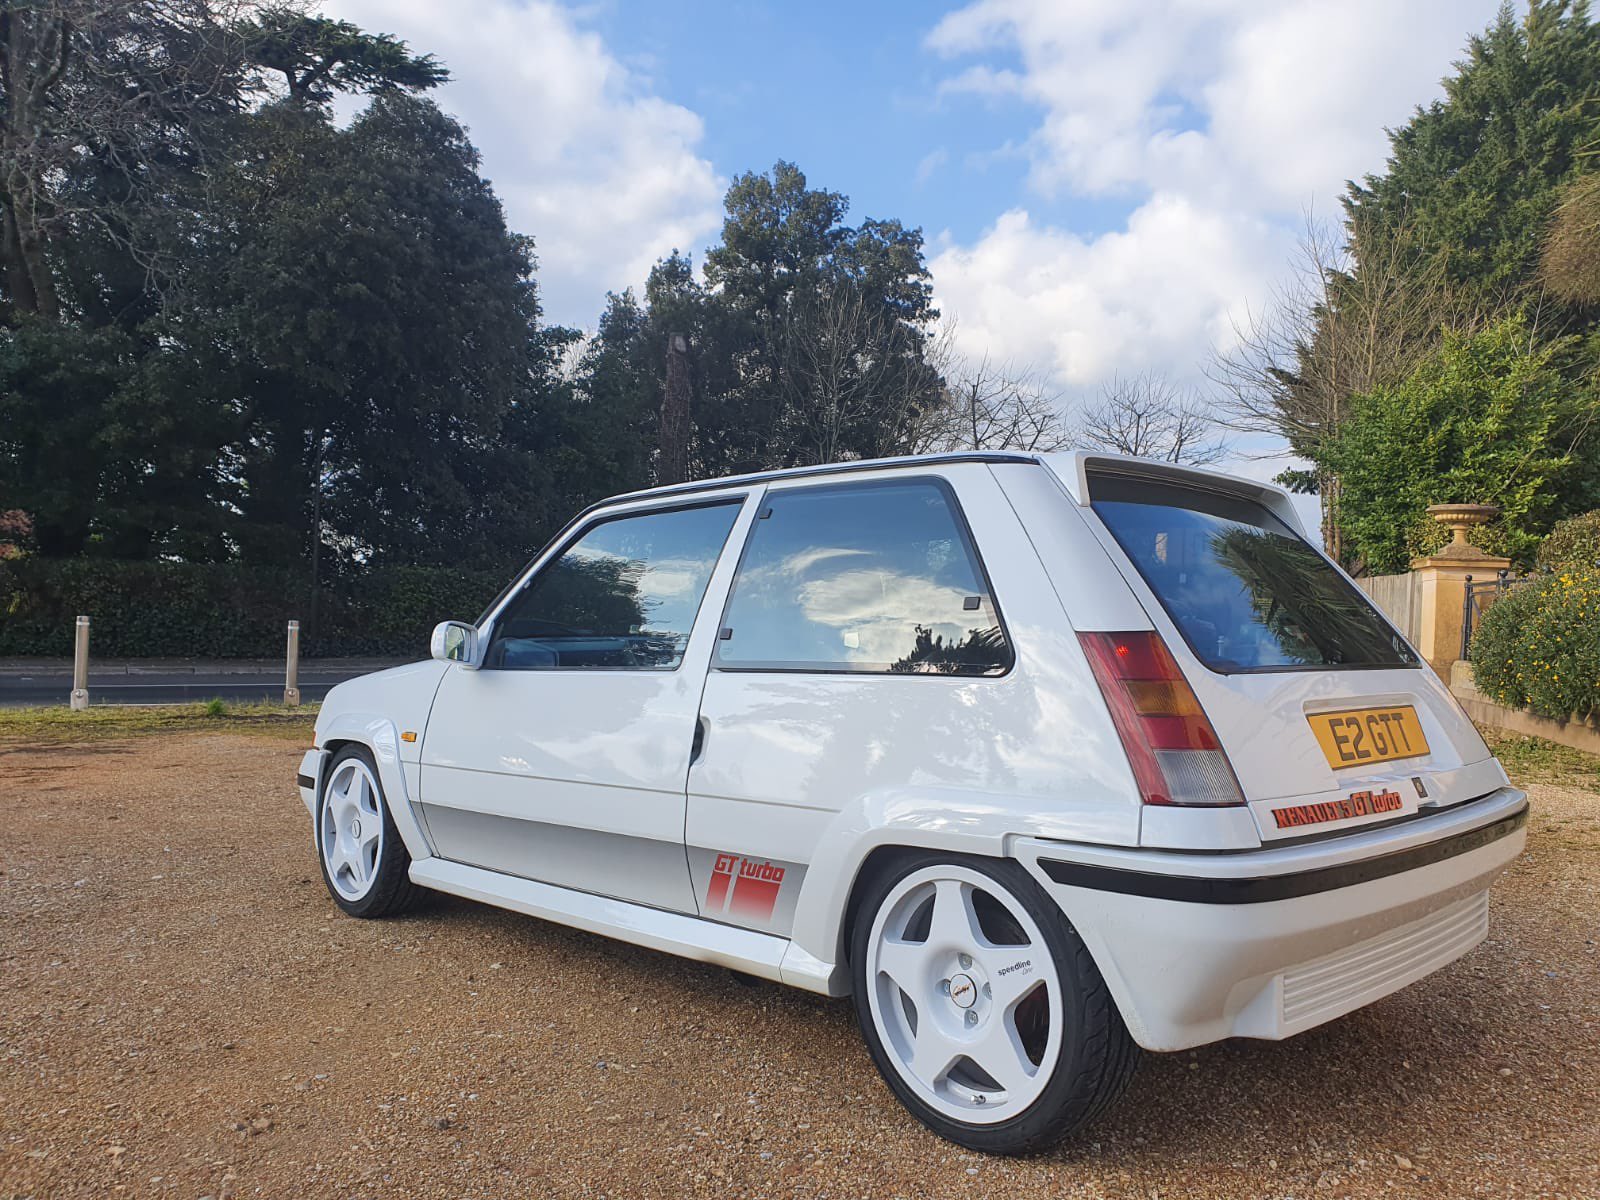 Ivor Braiden on Twitter: "Immaculate Renault 5 GT Turbo nicely fitted for  the final retro look with @SpeedlineCorse #type2110 wheels 7x16. Very  complimentary indeed. https://t.co/uIpIqVkZYw" / Twitter